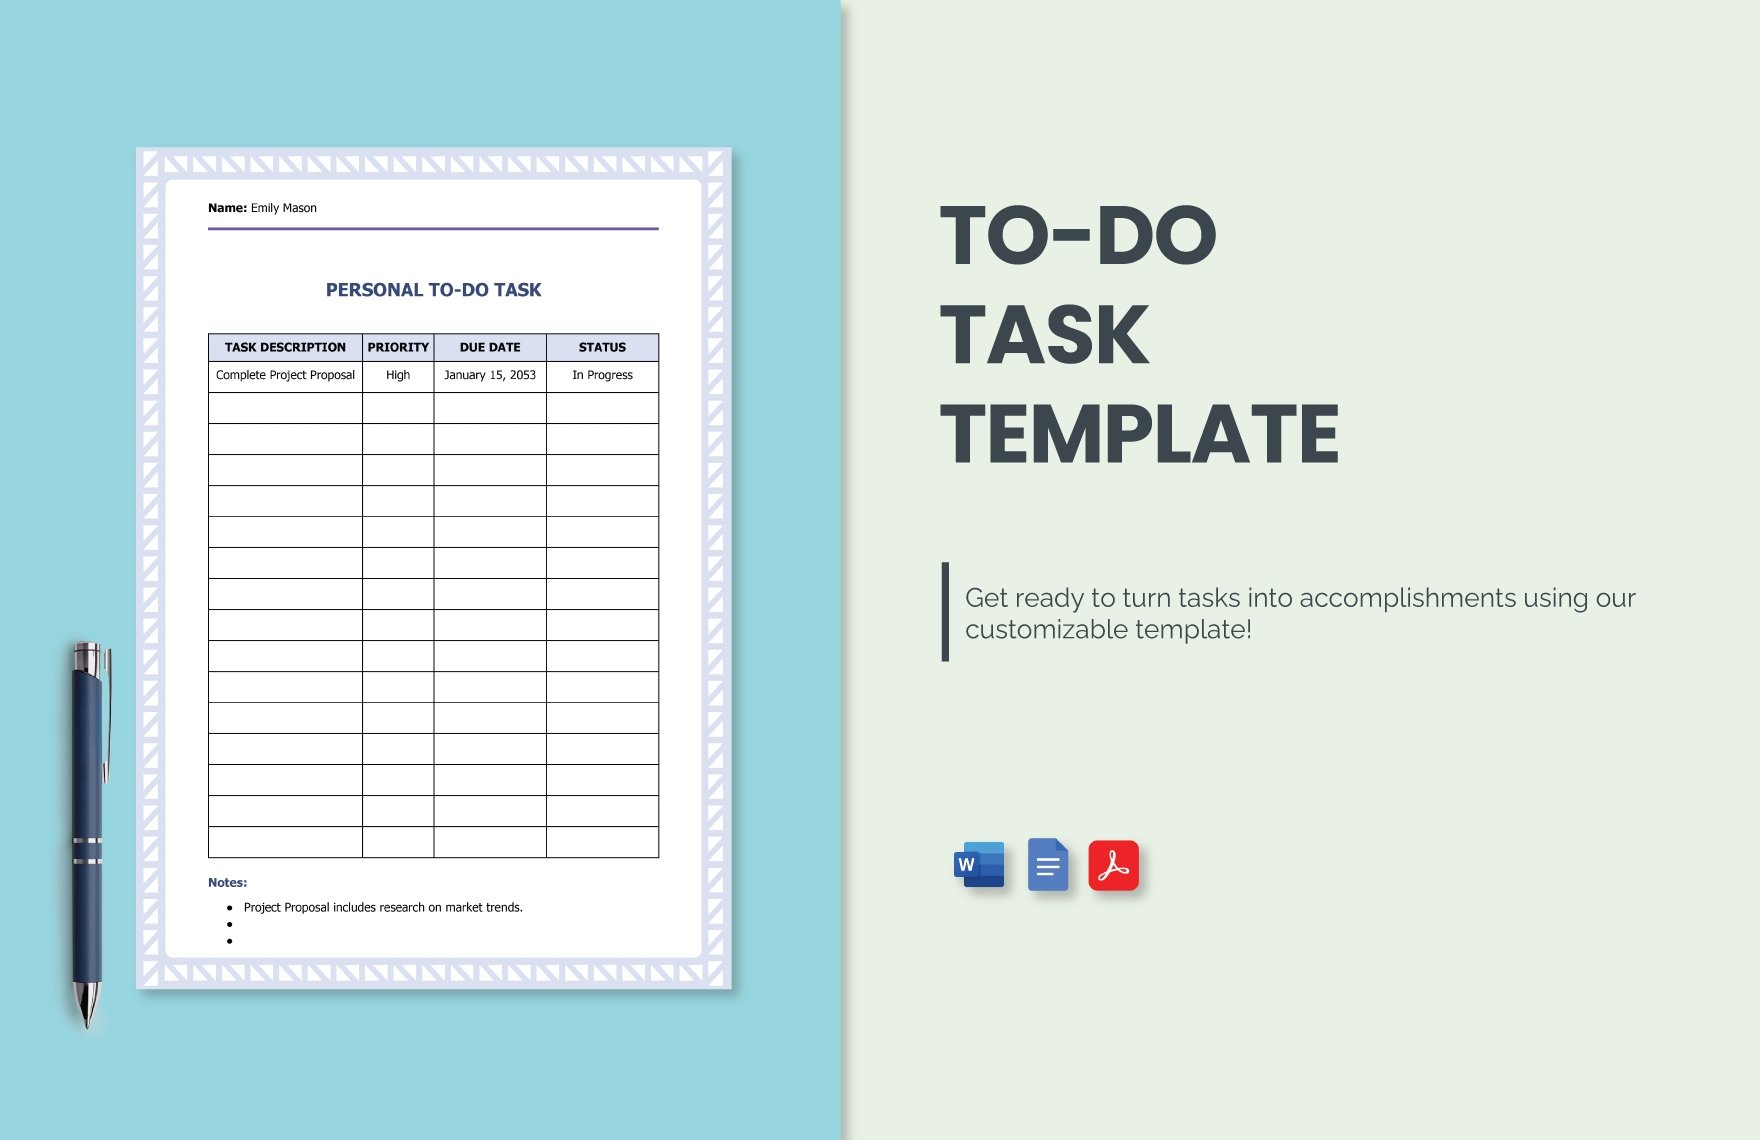 To-Do Task Template